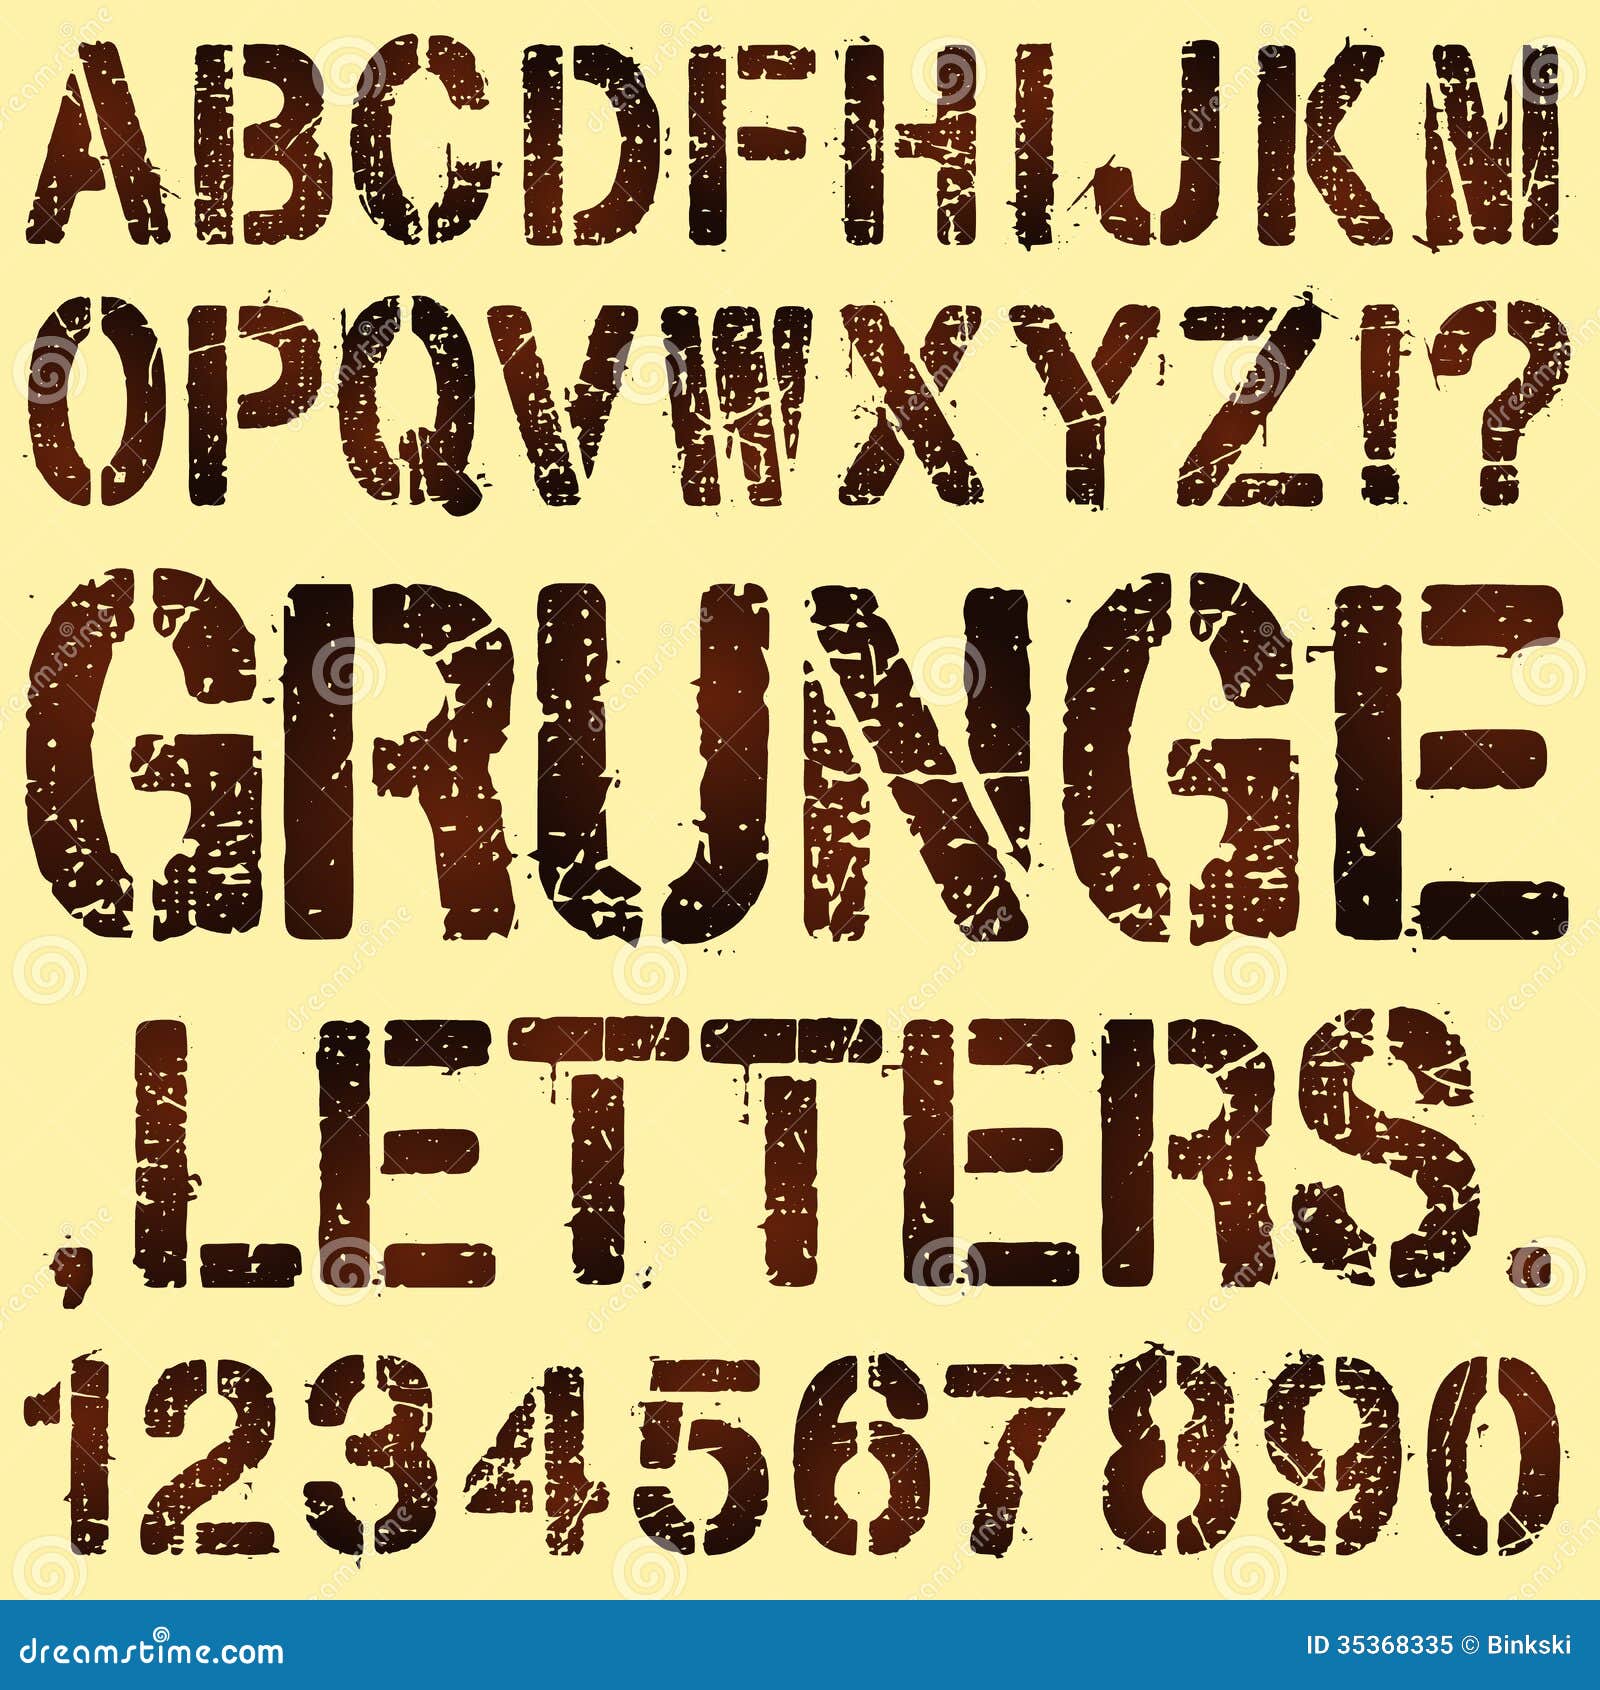 Grunge Stencil Letters Stock Vector. Illustration Of Text - 35368335